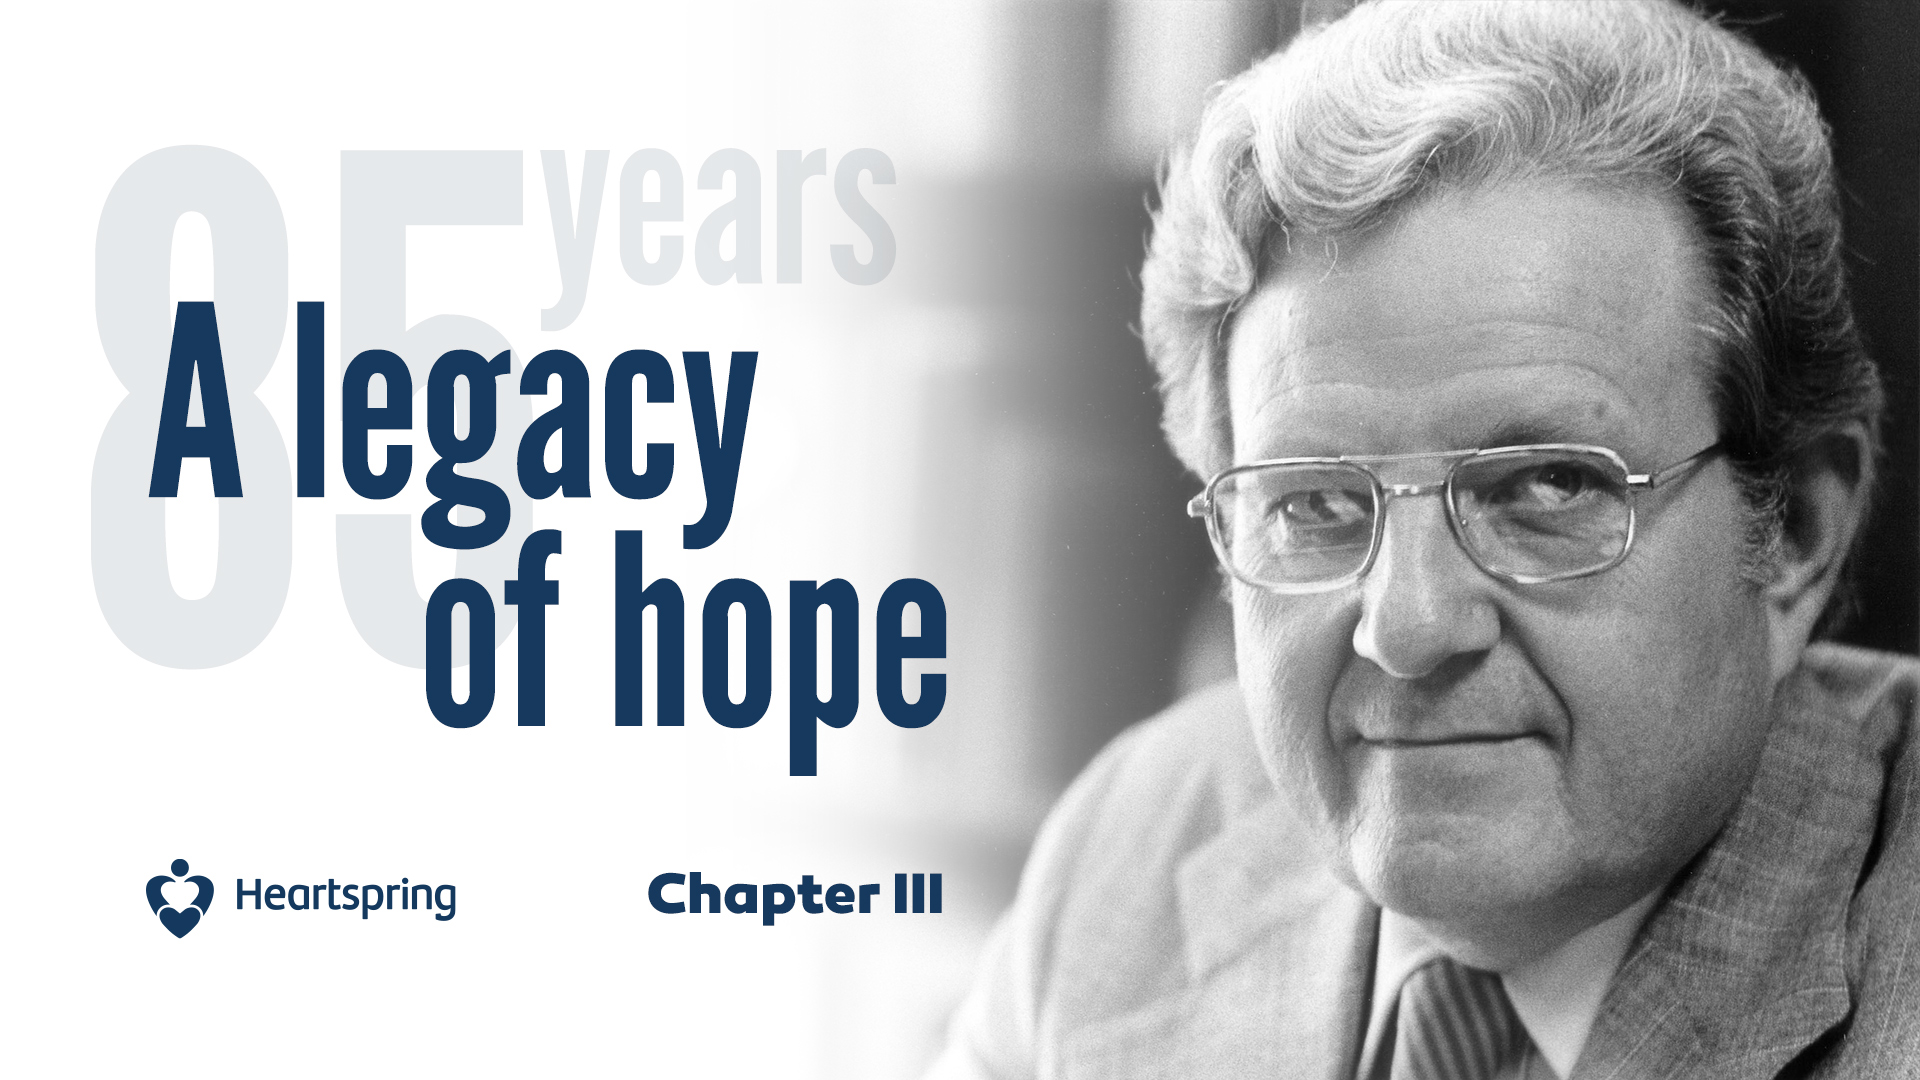 Chapter III: 85 Years A Legacy of Hope